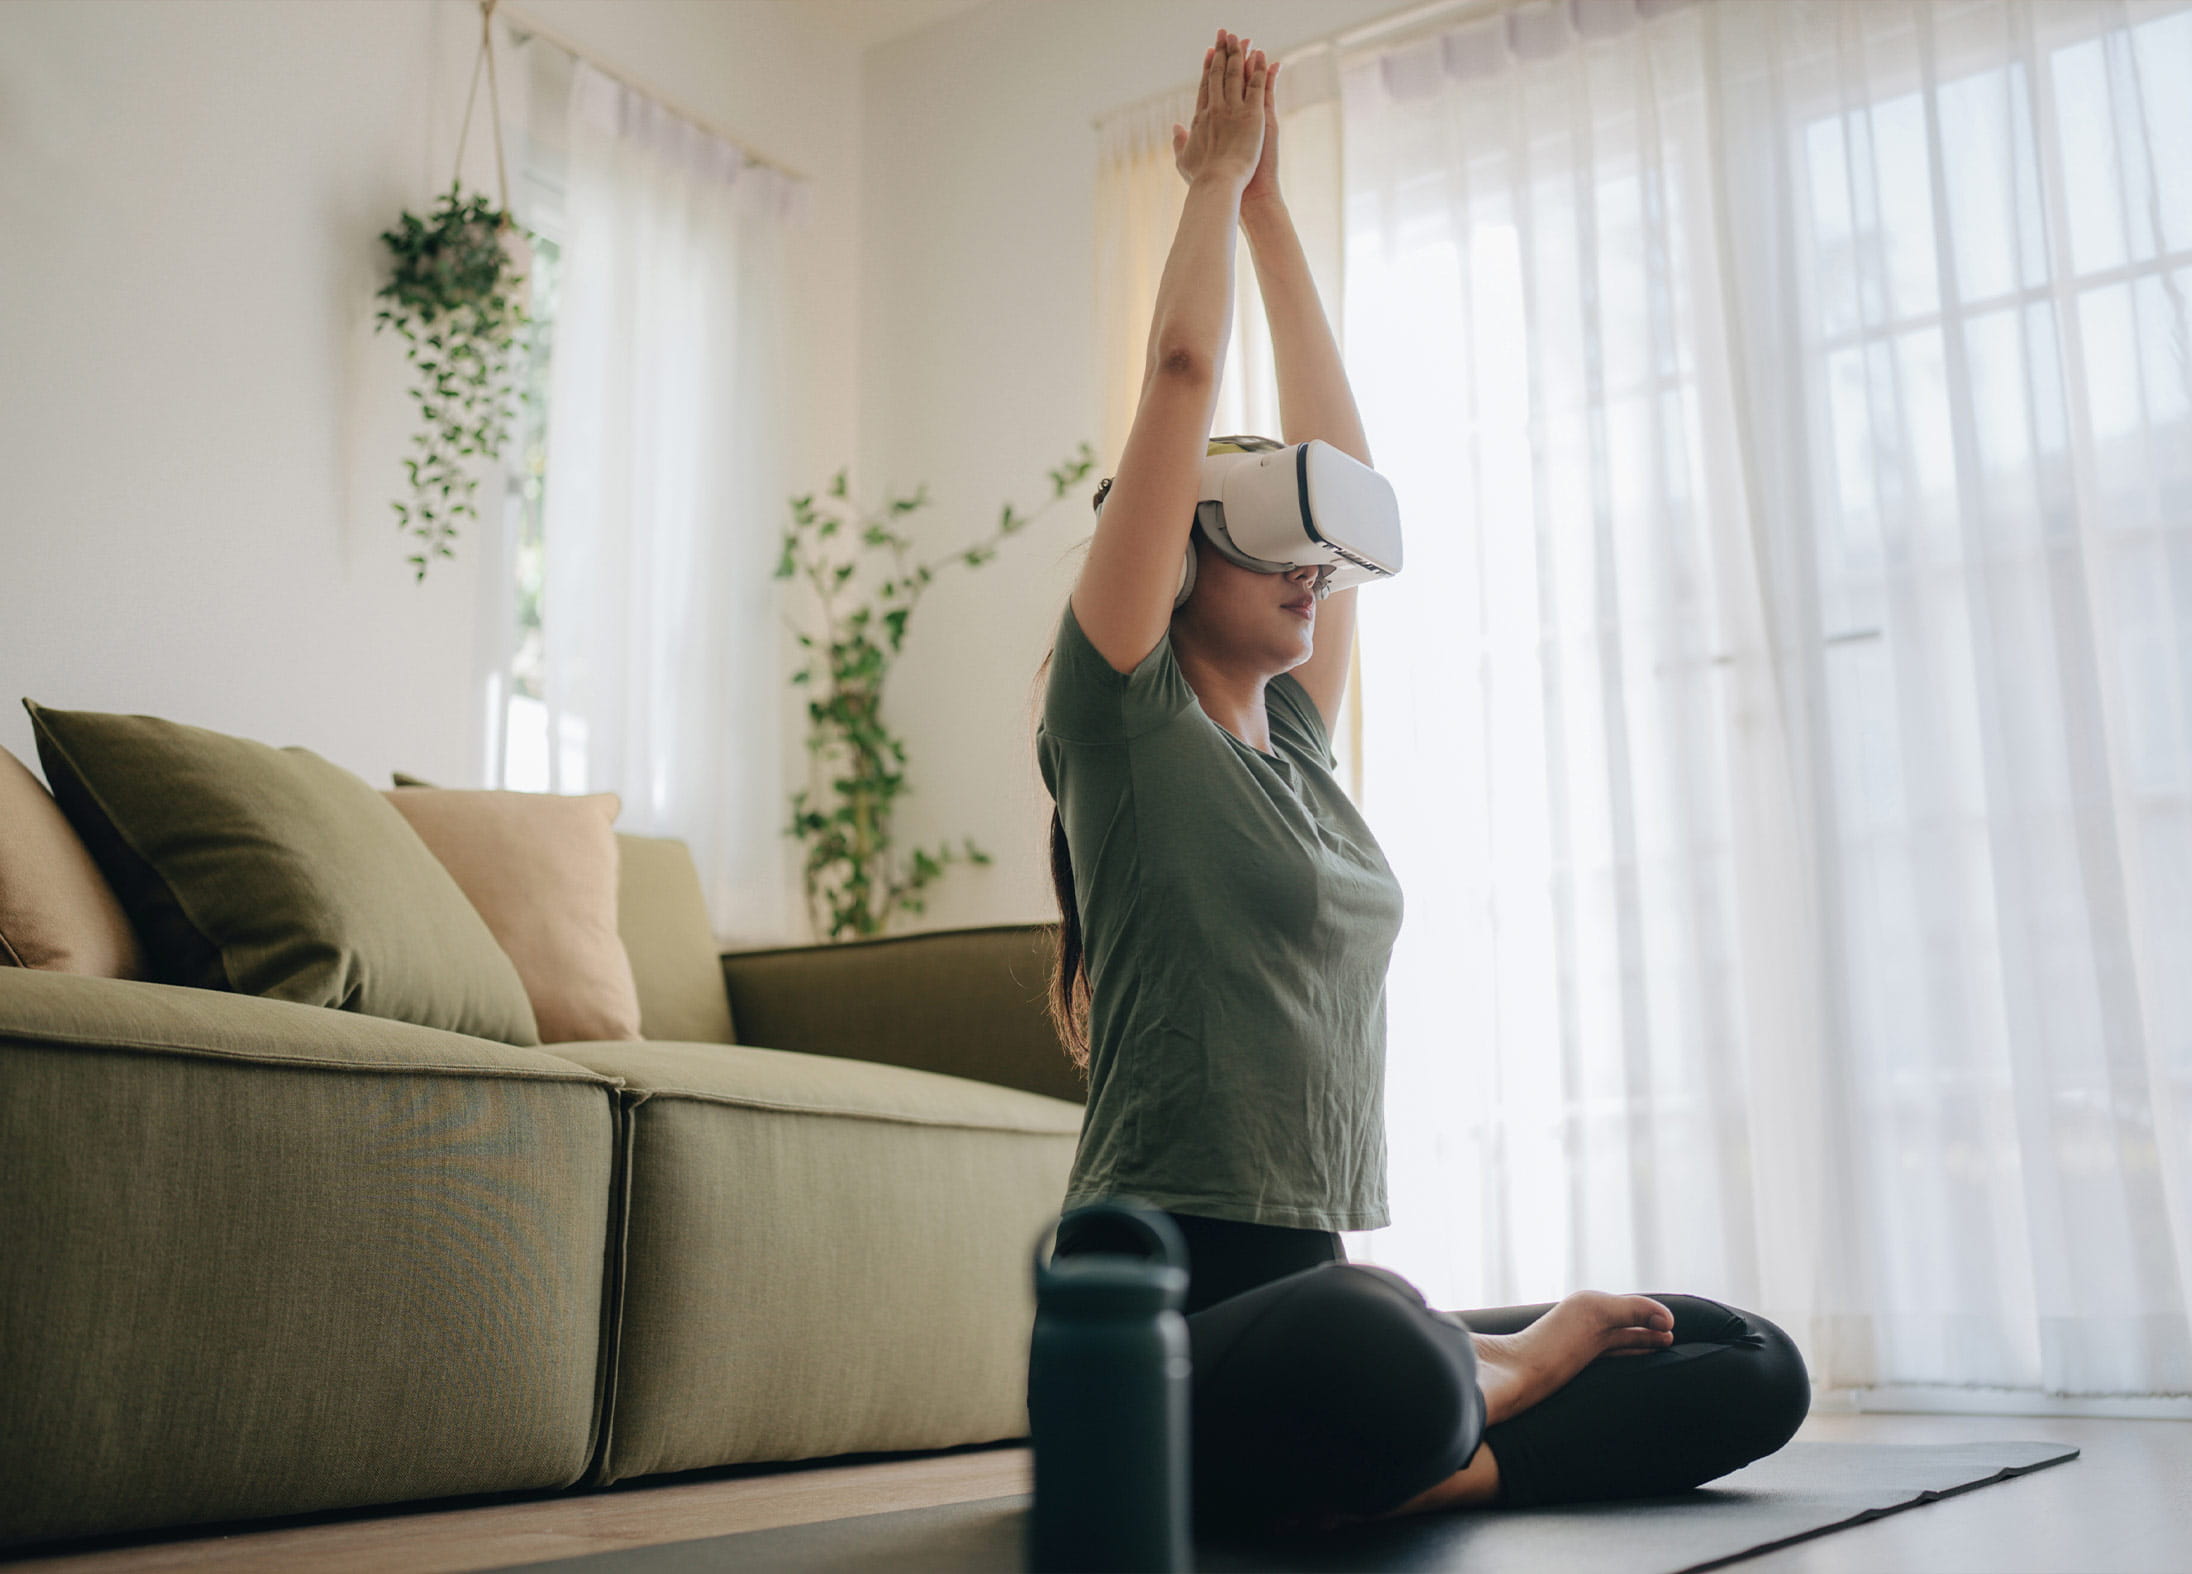 A woman using a VR headset to meditate